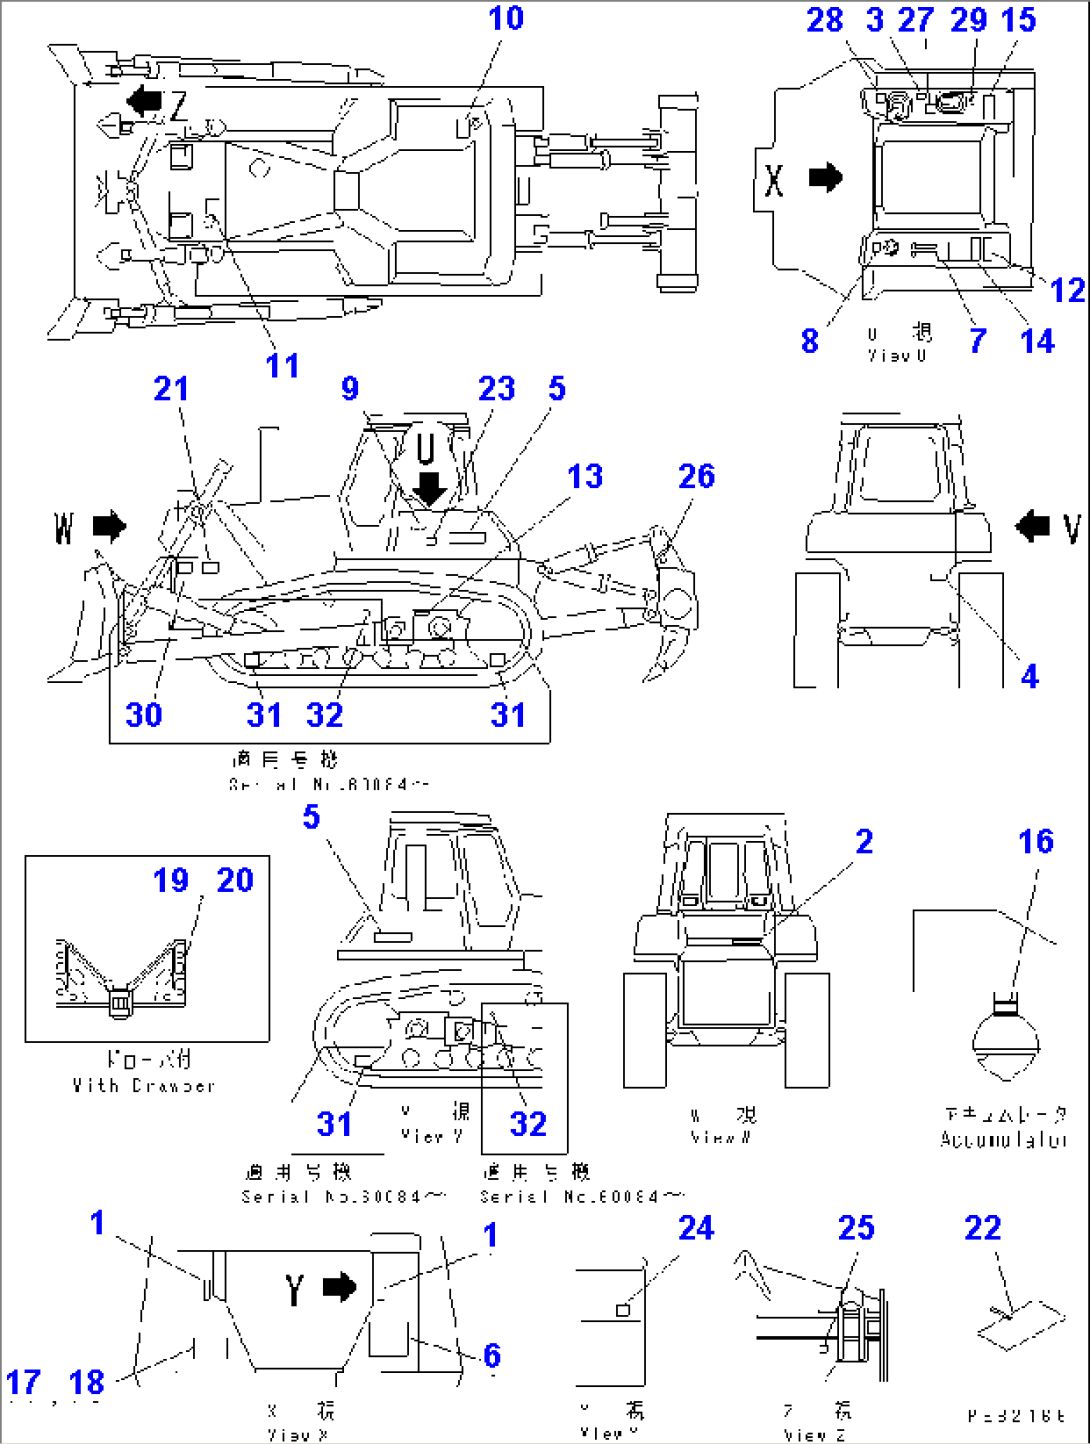 MARKS AND PLATES (ENGLISH EC SPEC.)(#60001-61047)